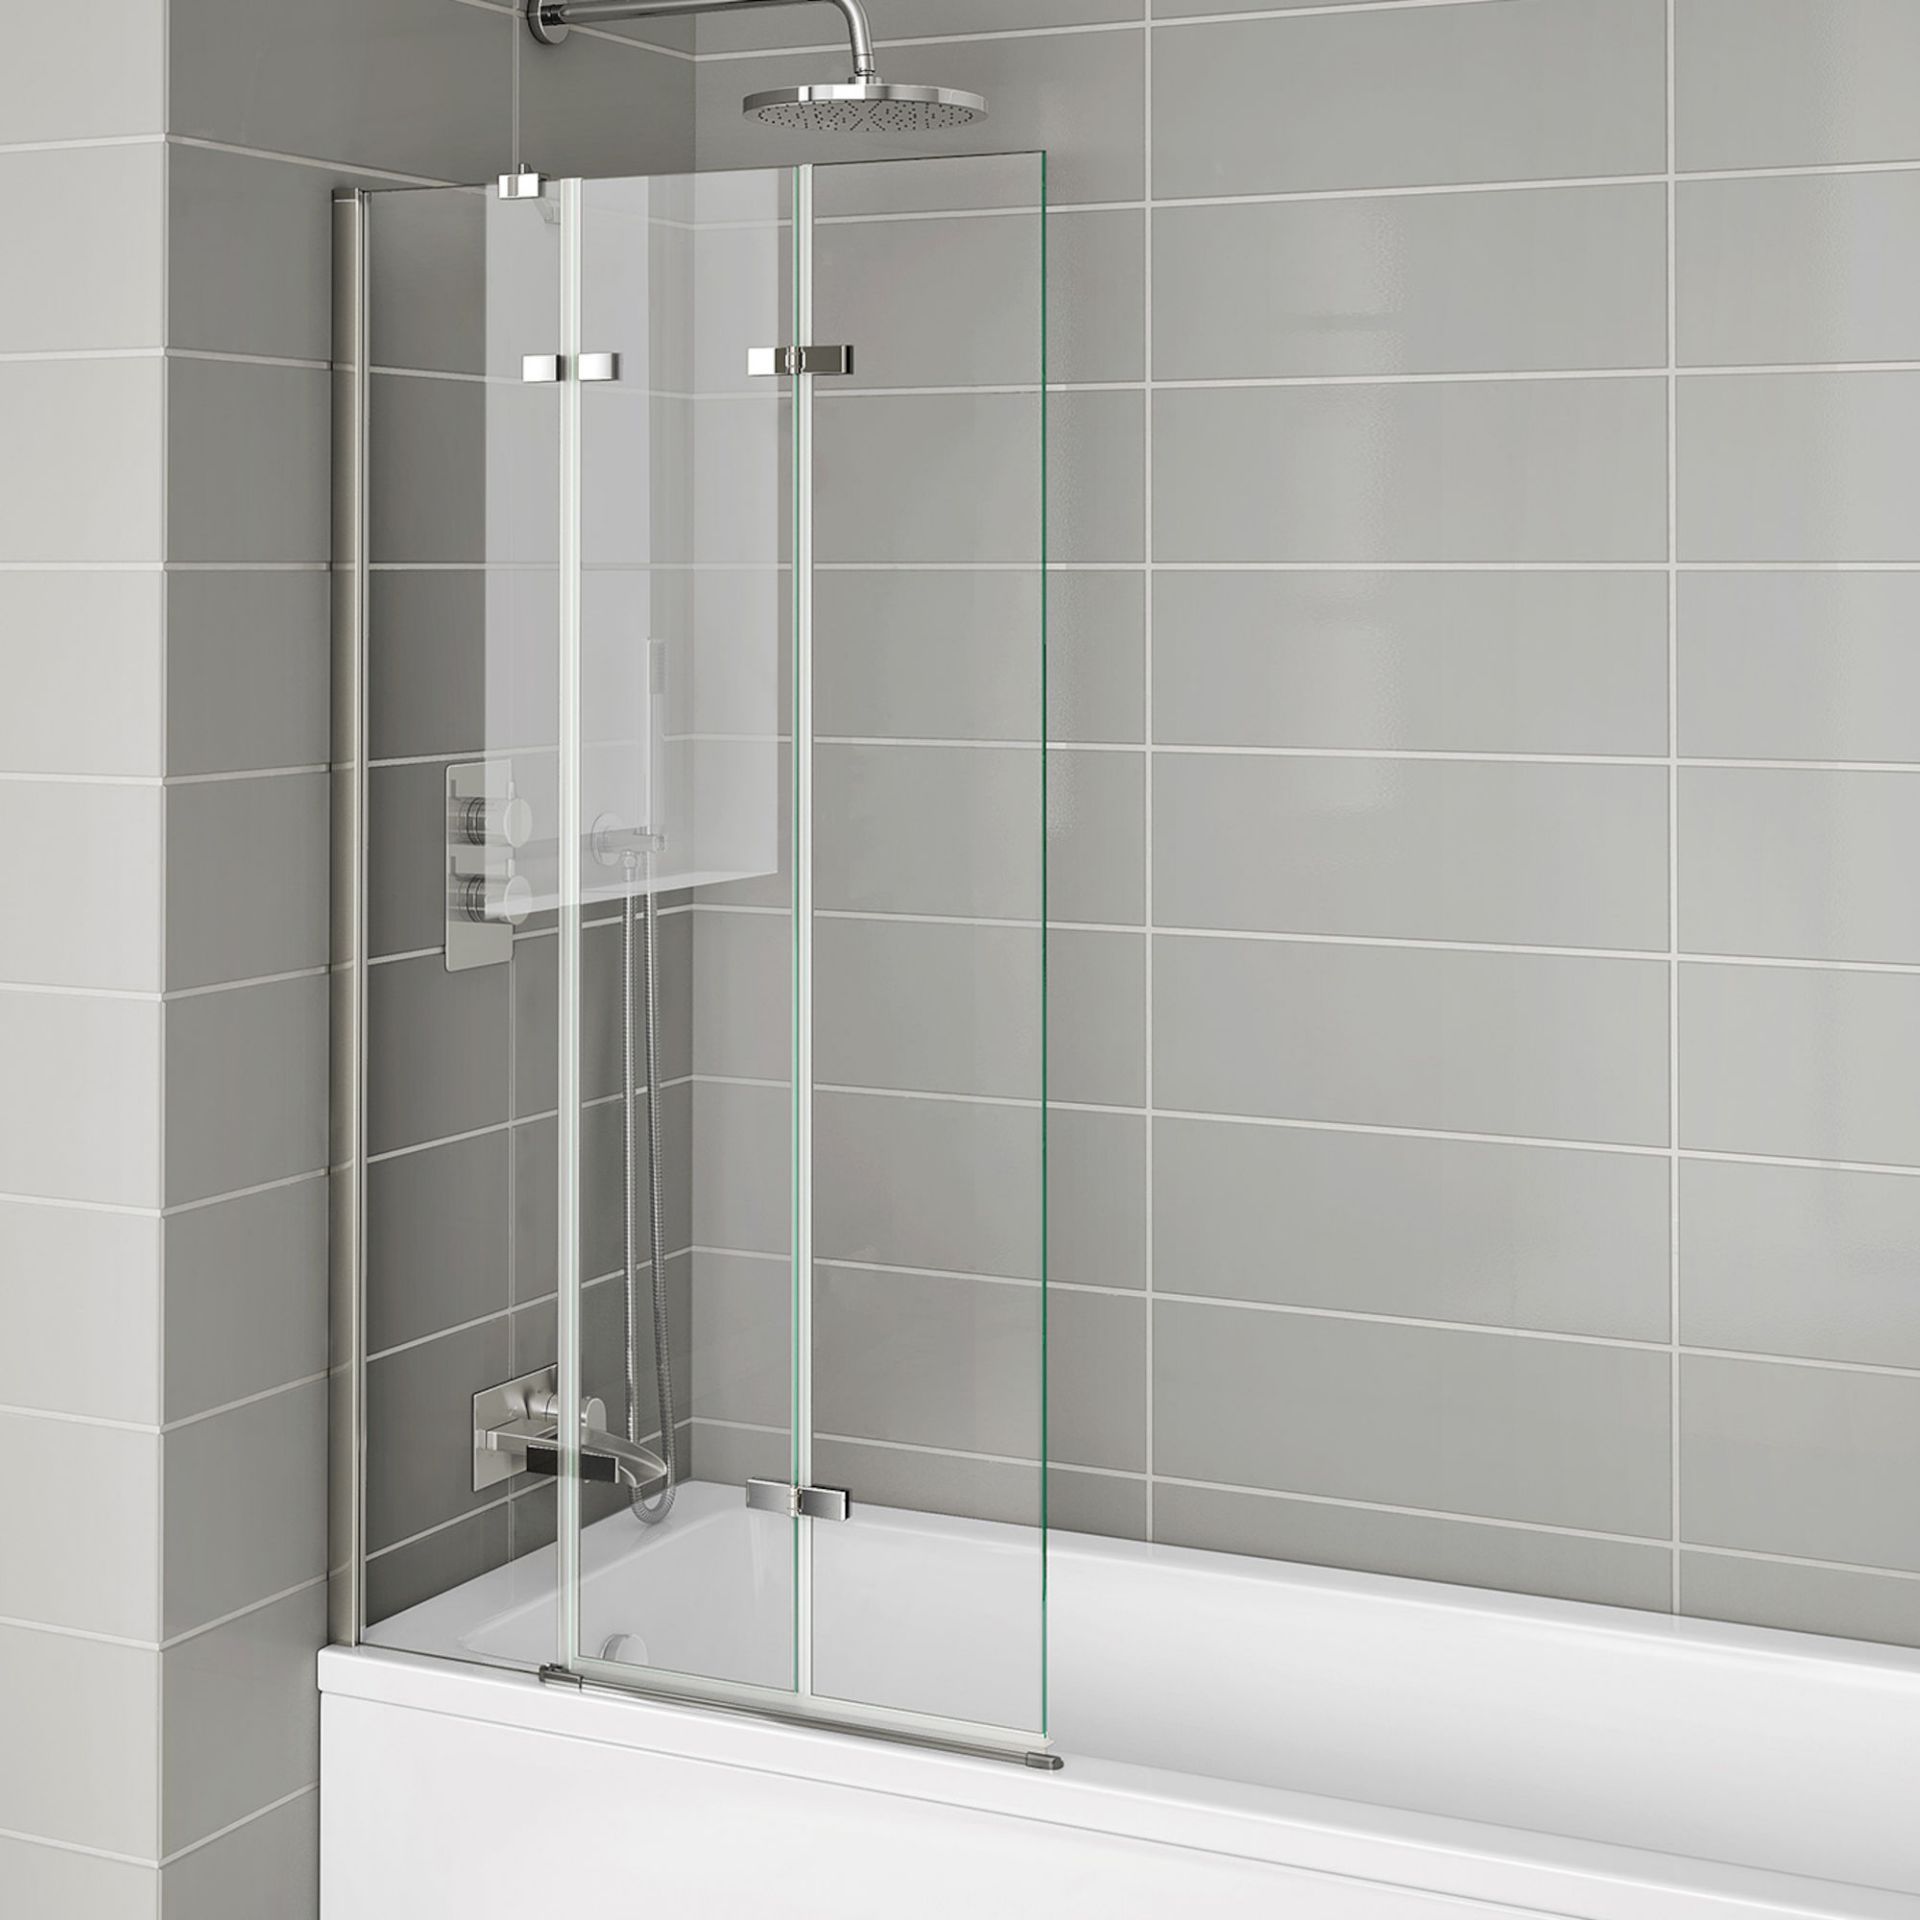 (EY34) 800mm Left Hand Folding Bath Screen - 6mm. RRP £189.99. EasyClean glass - Our glass has